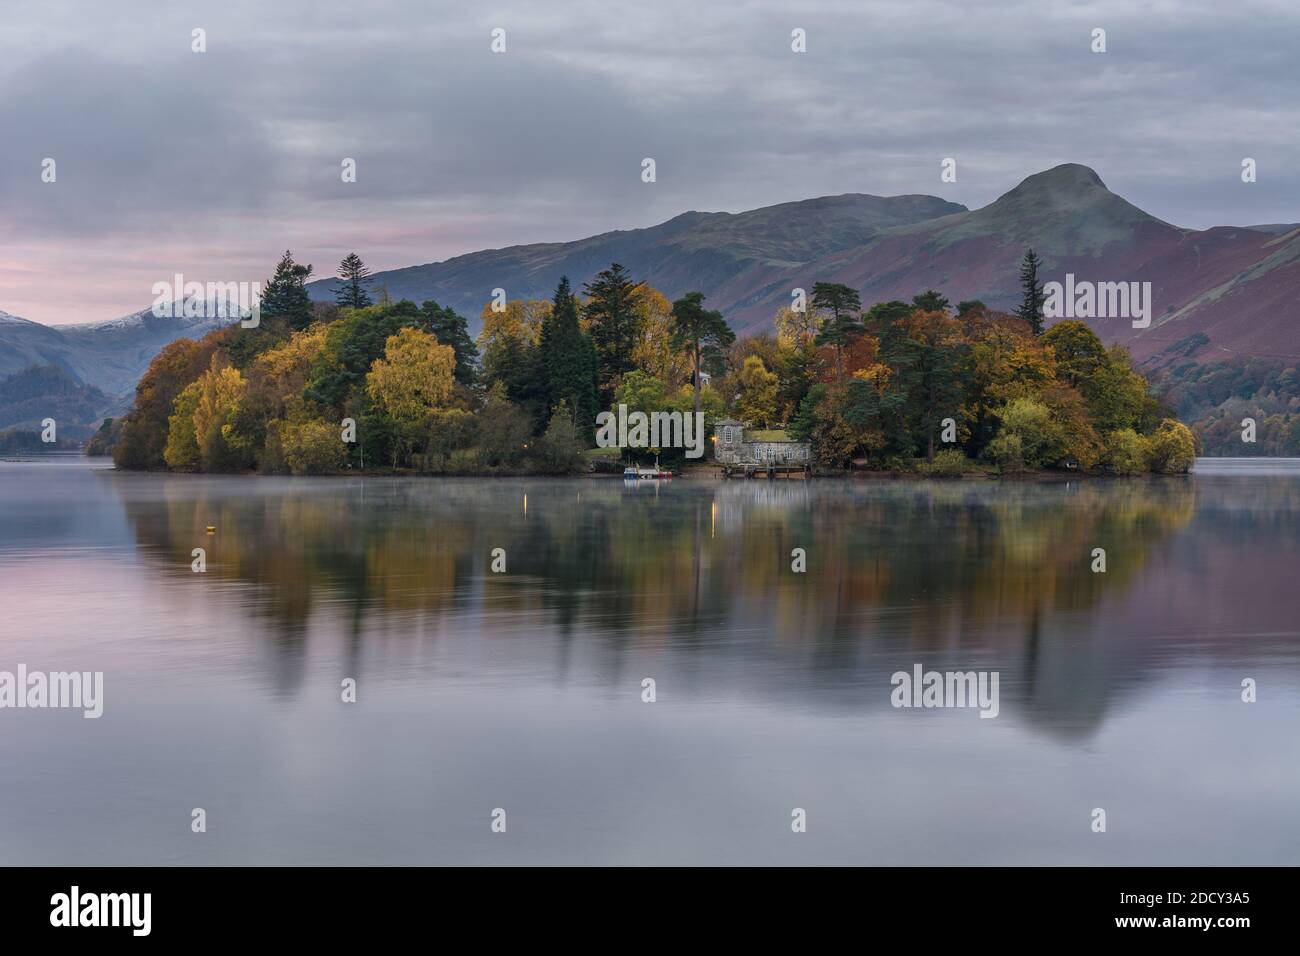 Autumn trees on a cloudy morning at Derwentwater in the Lake District. Stock Photo